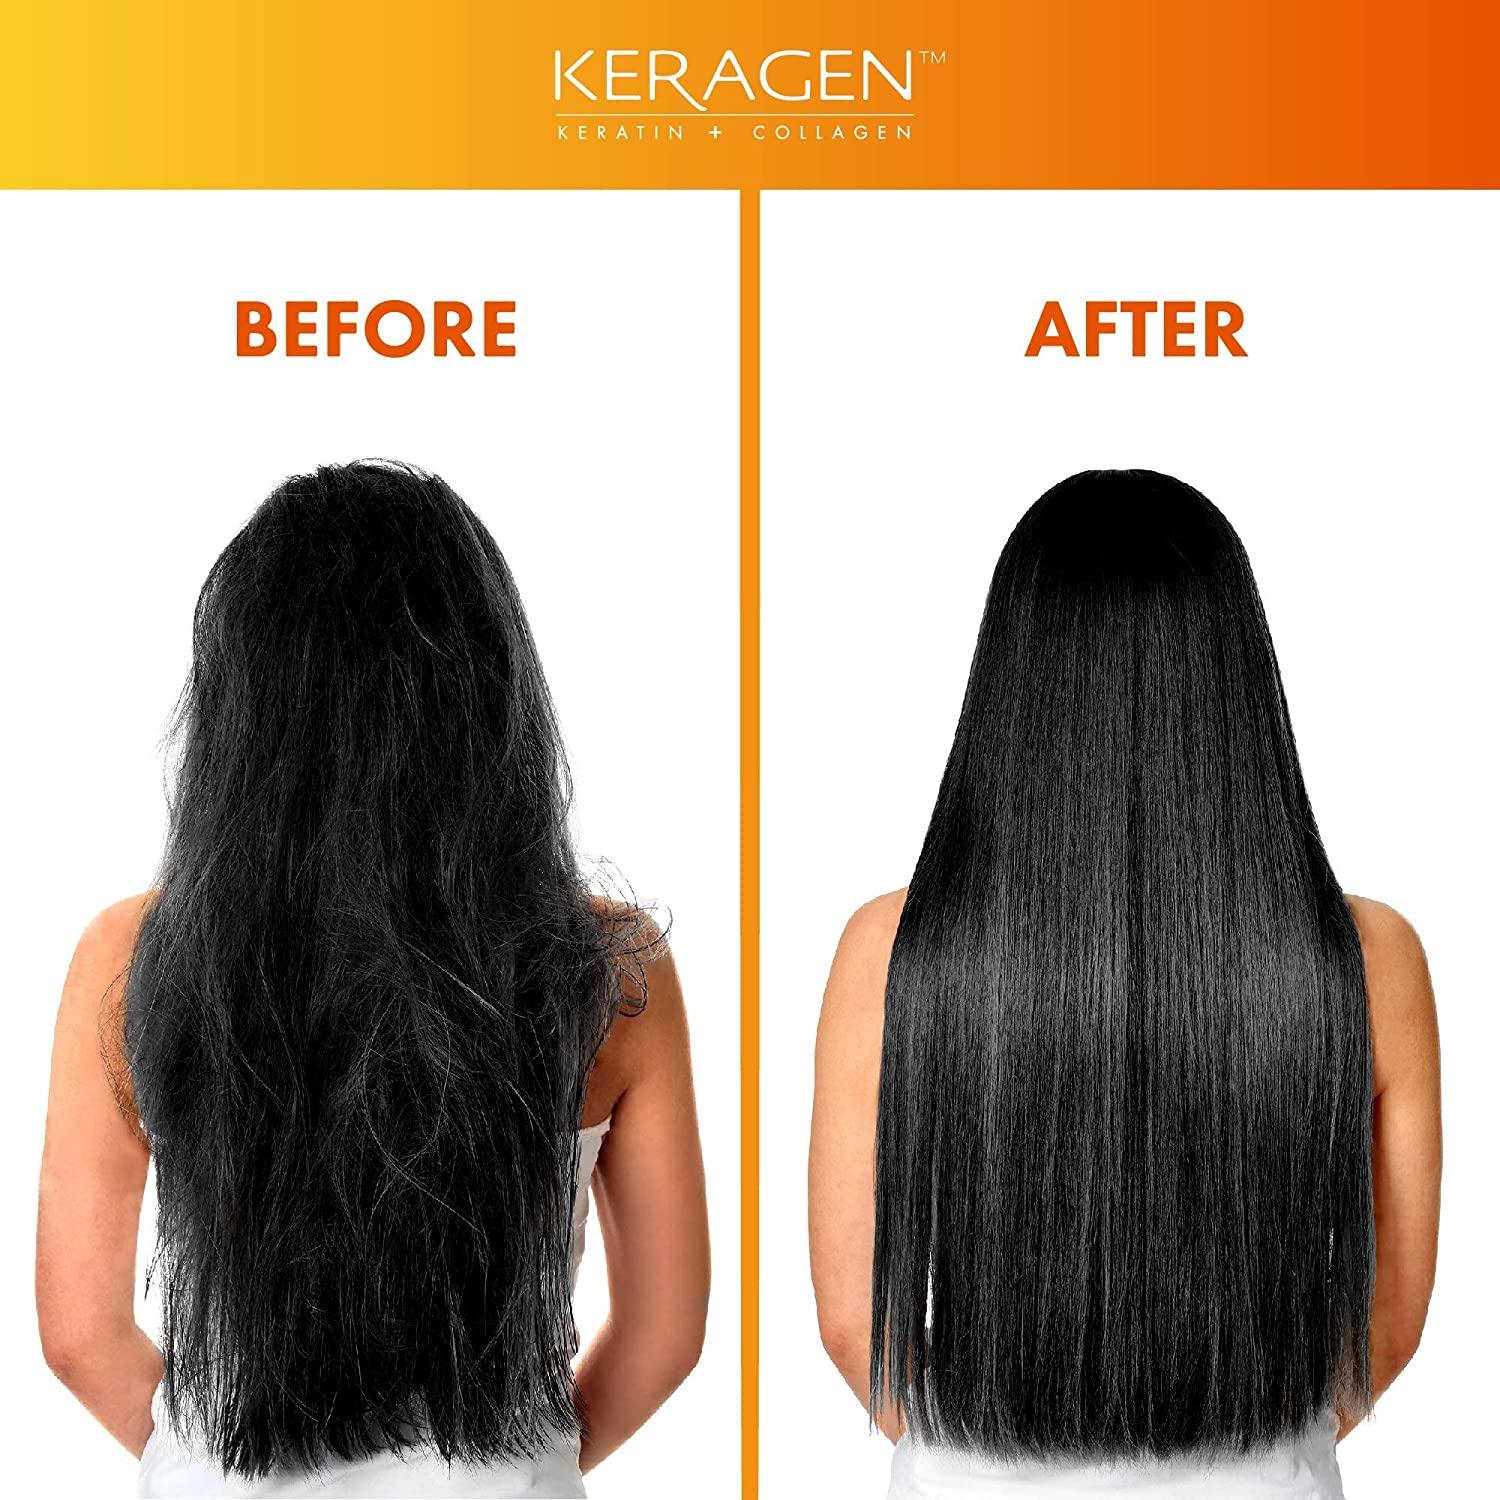 Keragen - Brazilian Keratin Smoothing Treatment, Blowout Straightening  System for Dry and Damaged Hair, 32 Oz - Forte, Sulfate Free - Eliminates  Curls and Frizz, Medium to Coarse Hair 32 Fl Oz (Pack of 1)